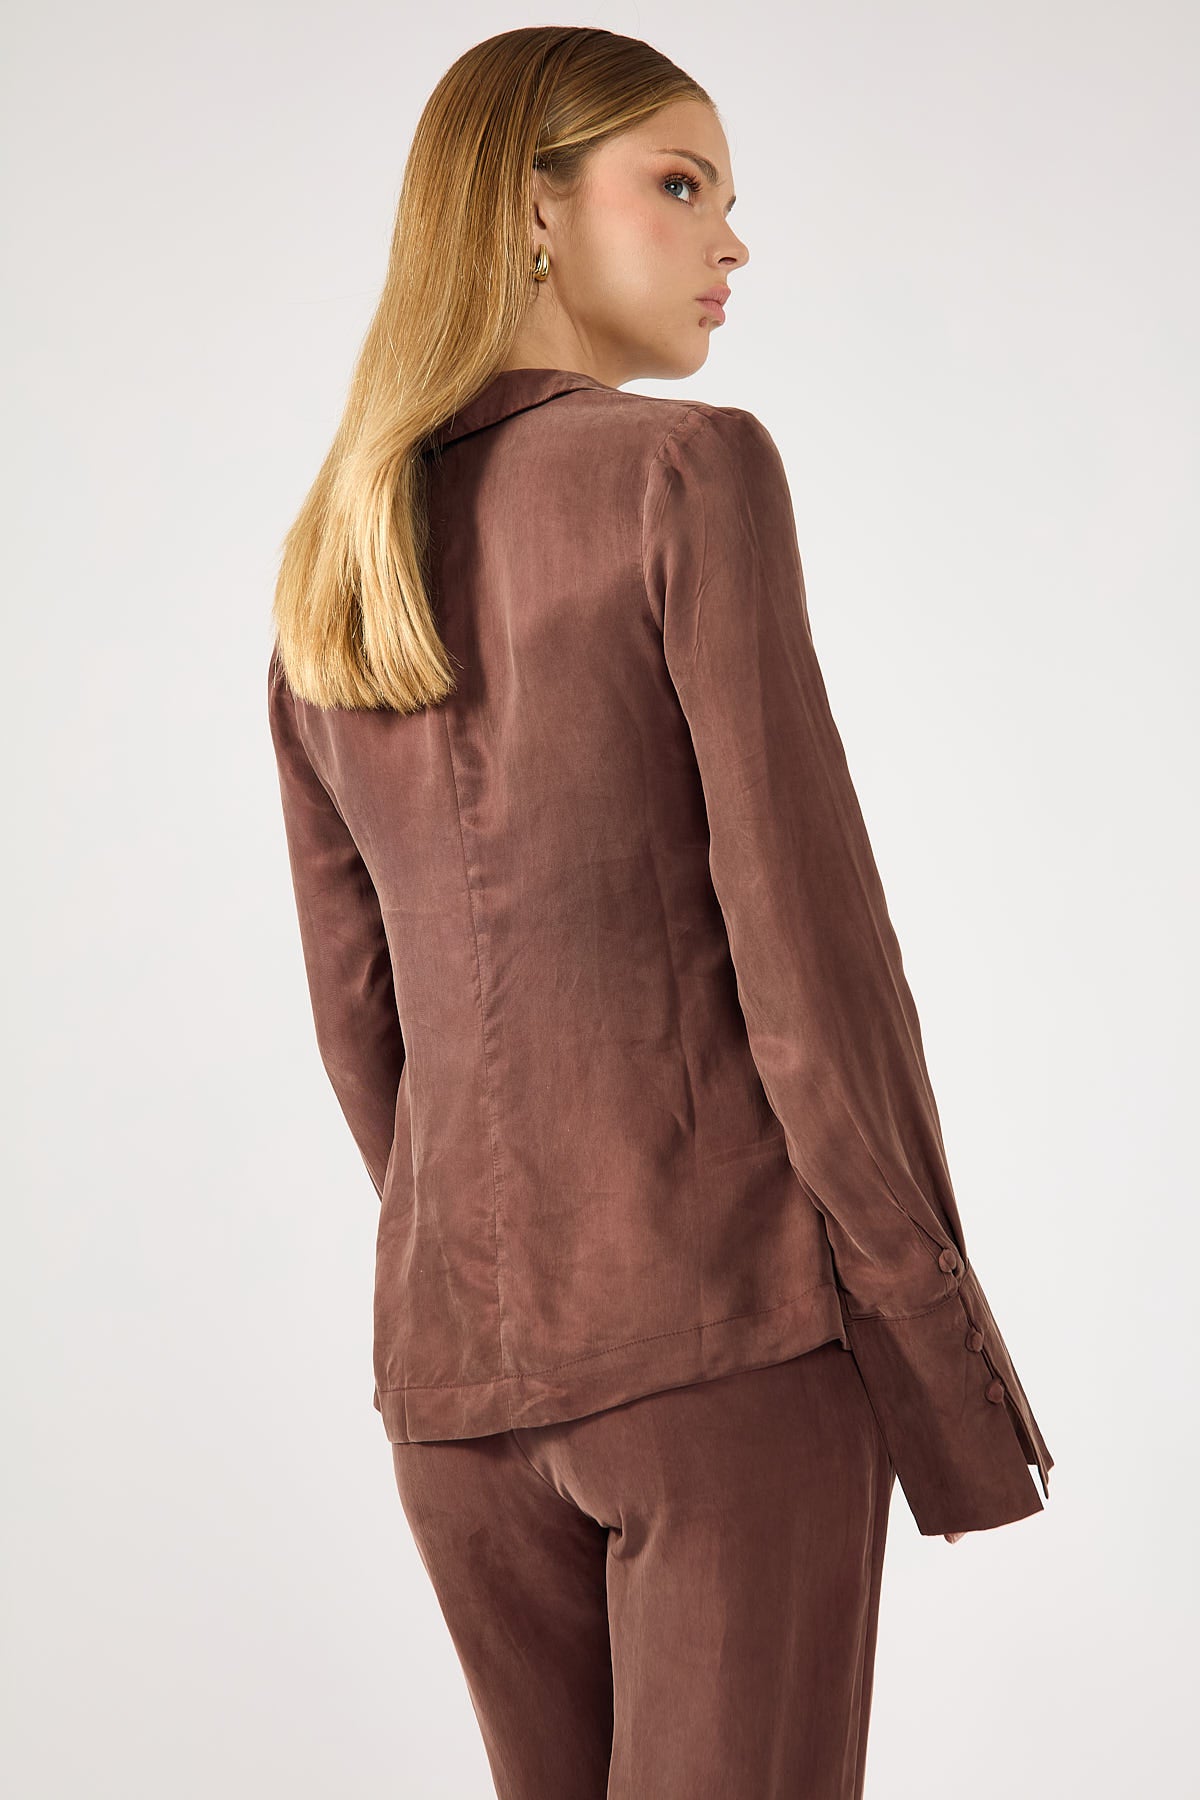 Perfect Stranger Prisca Open Front Button Up Cupro Shirt Brown